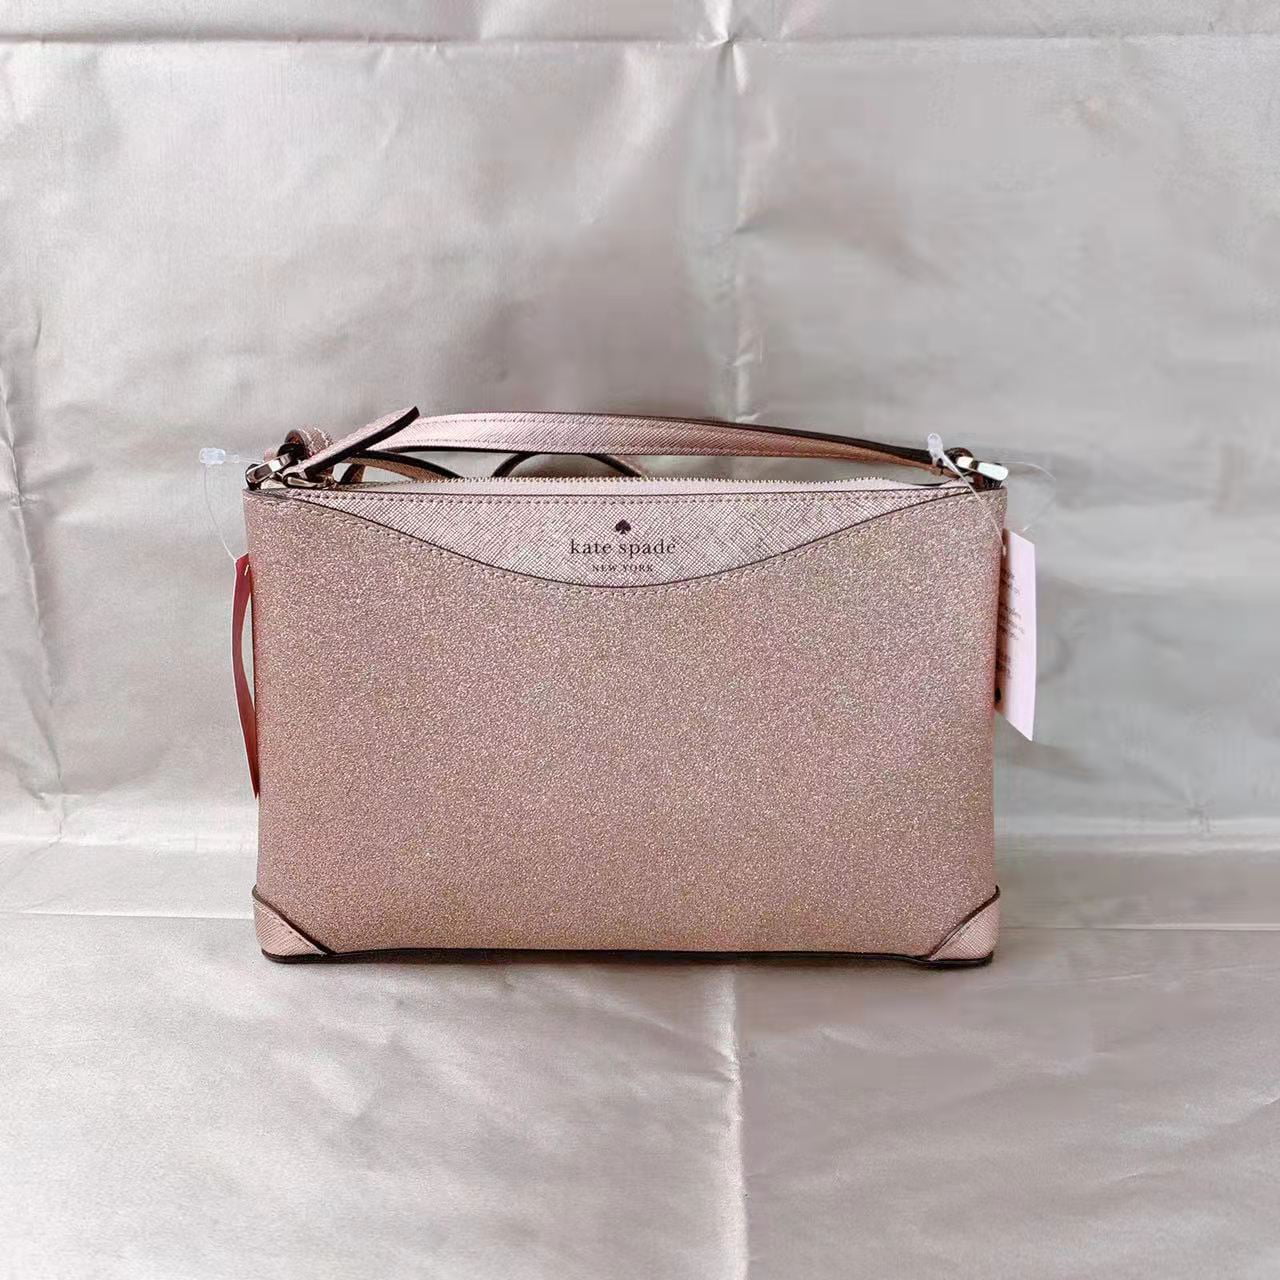 Buy Kate Spade K4624 Glitter Fabric CrossBody Bag In Rose Gold Online at  Lowest Price in Ubuy France. 190993420